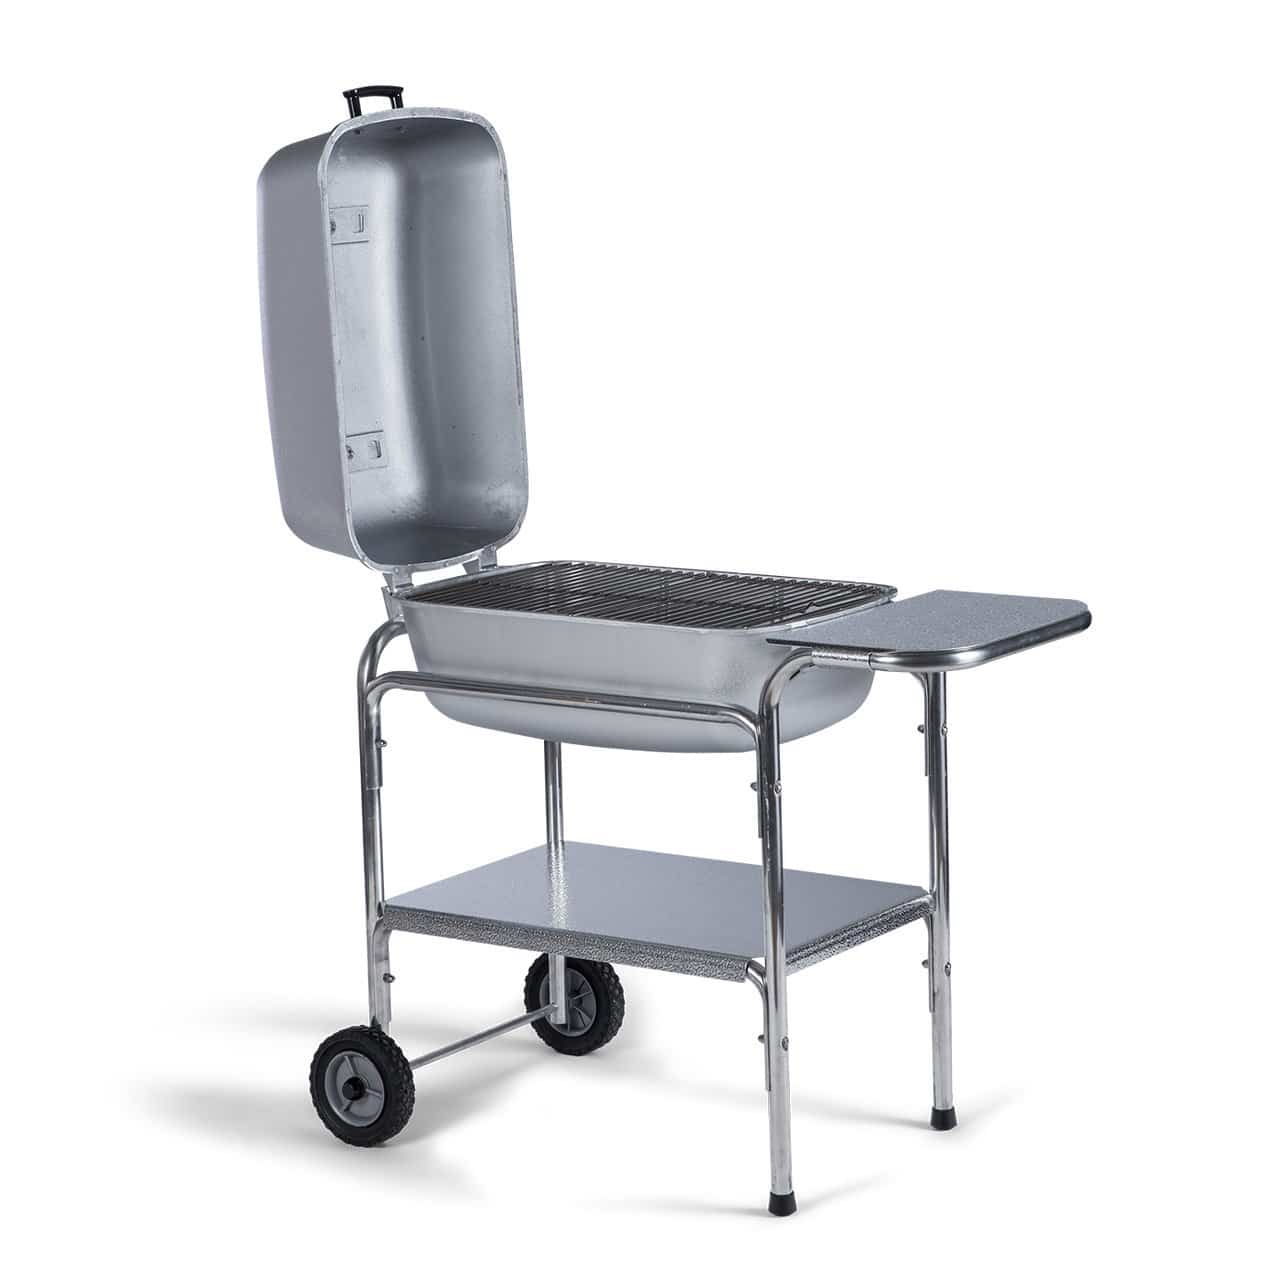 PK Grills Charcoal Grill & Smoker Combination